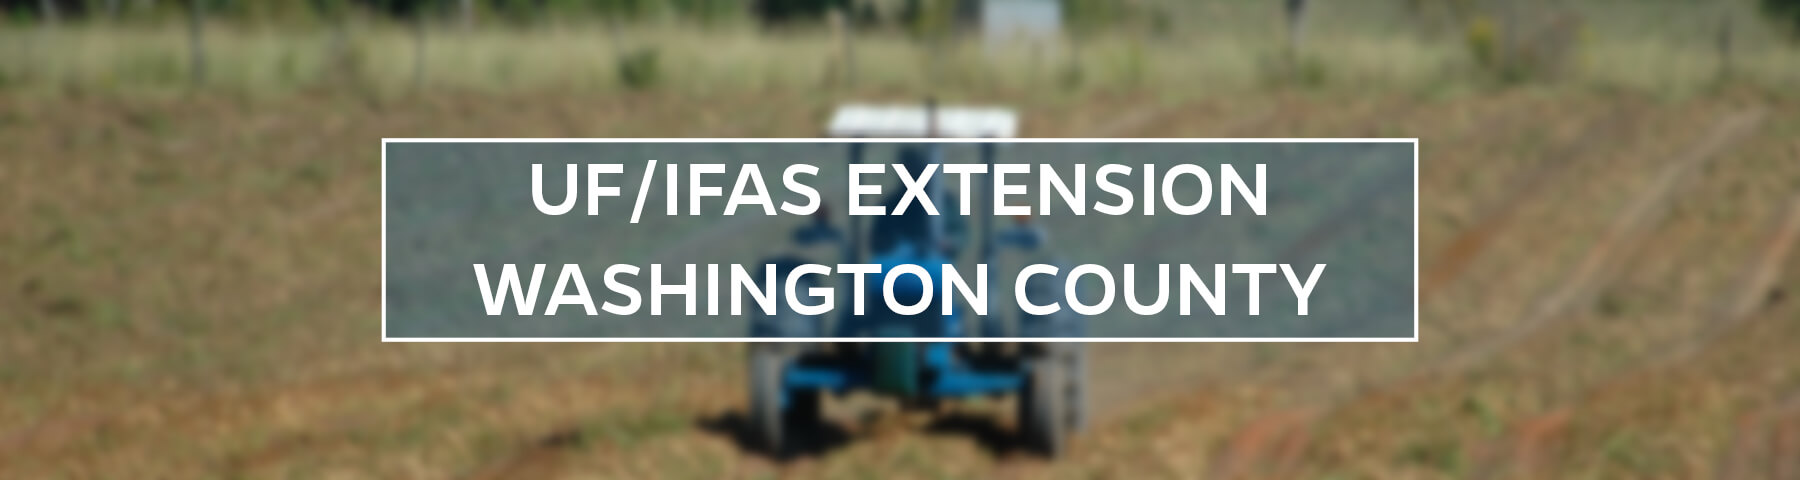 UF/IFAS Extension Washington County